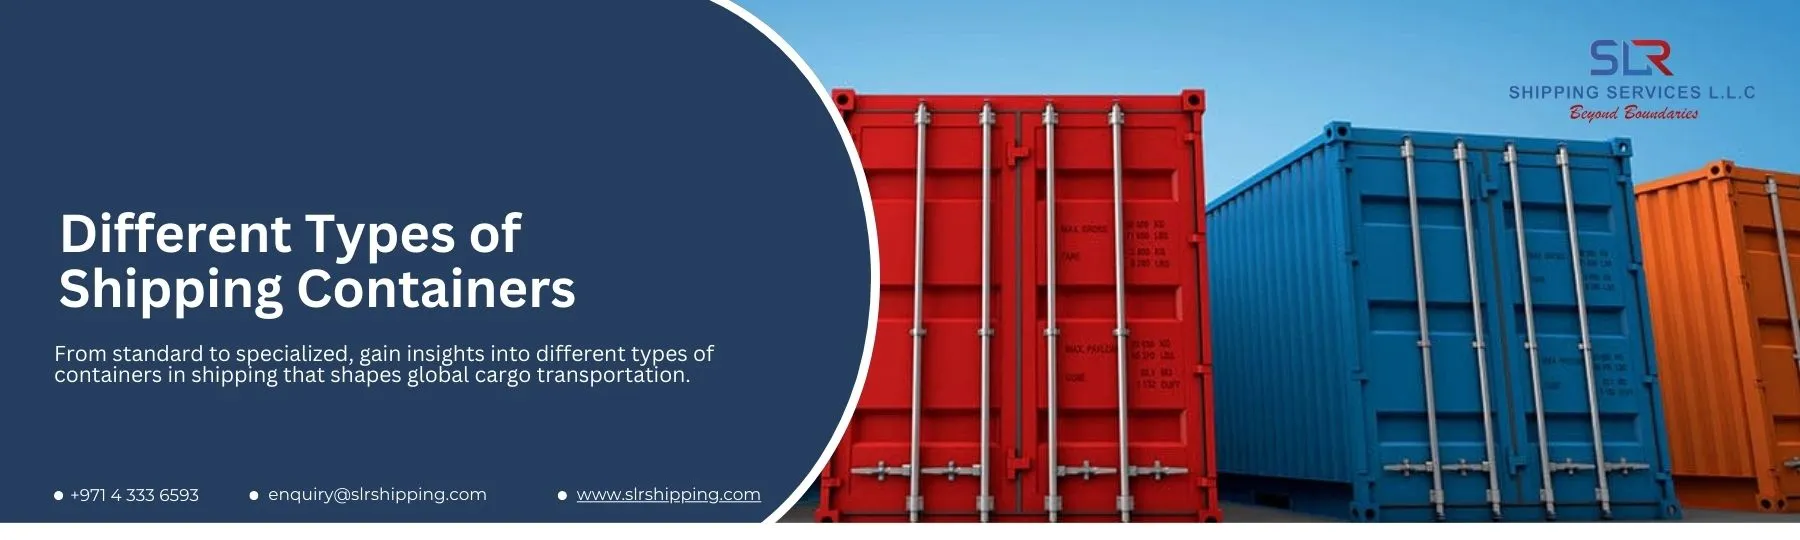 different types of shipping containers